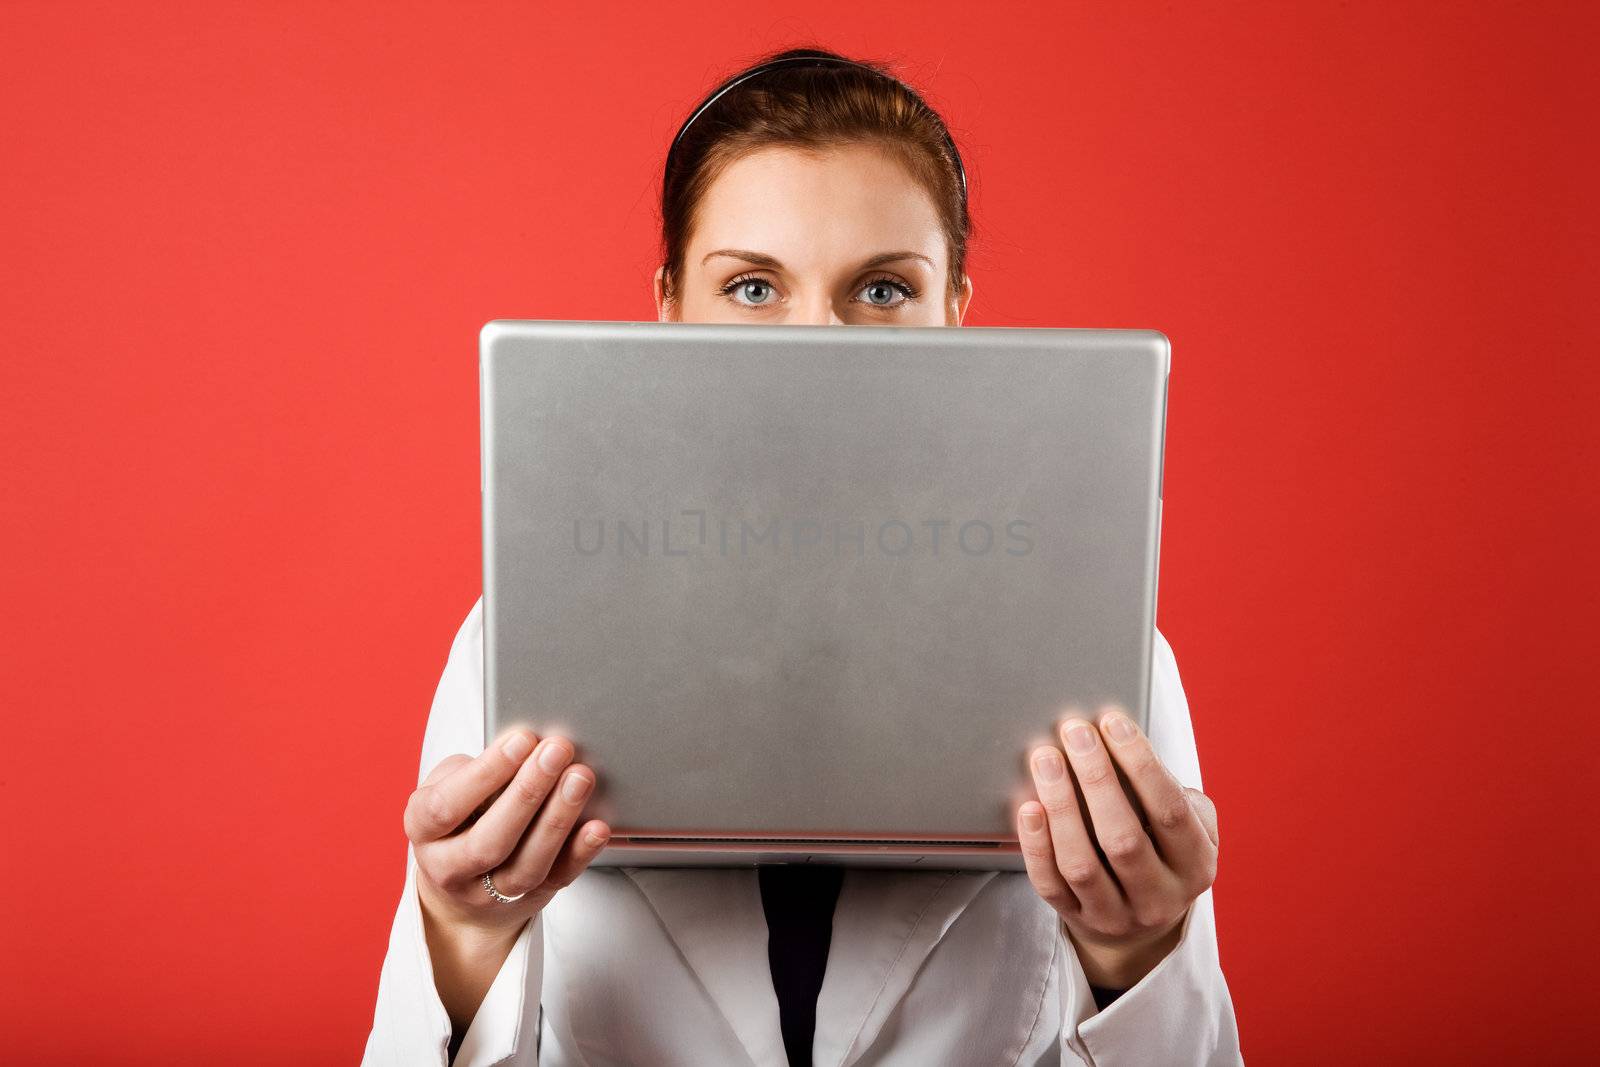 A young woman hiding behind and using a laptop computer wirelessly